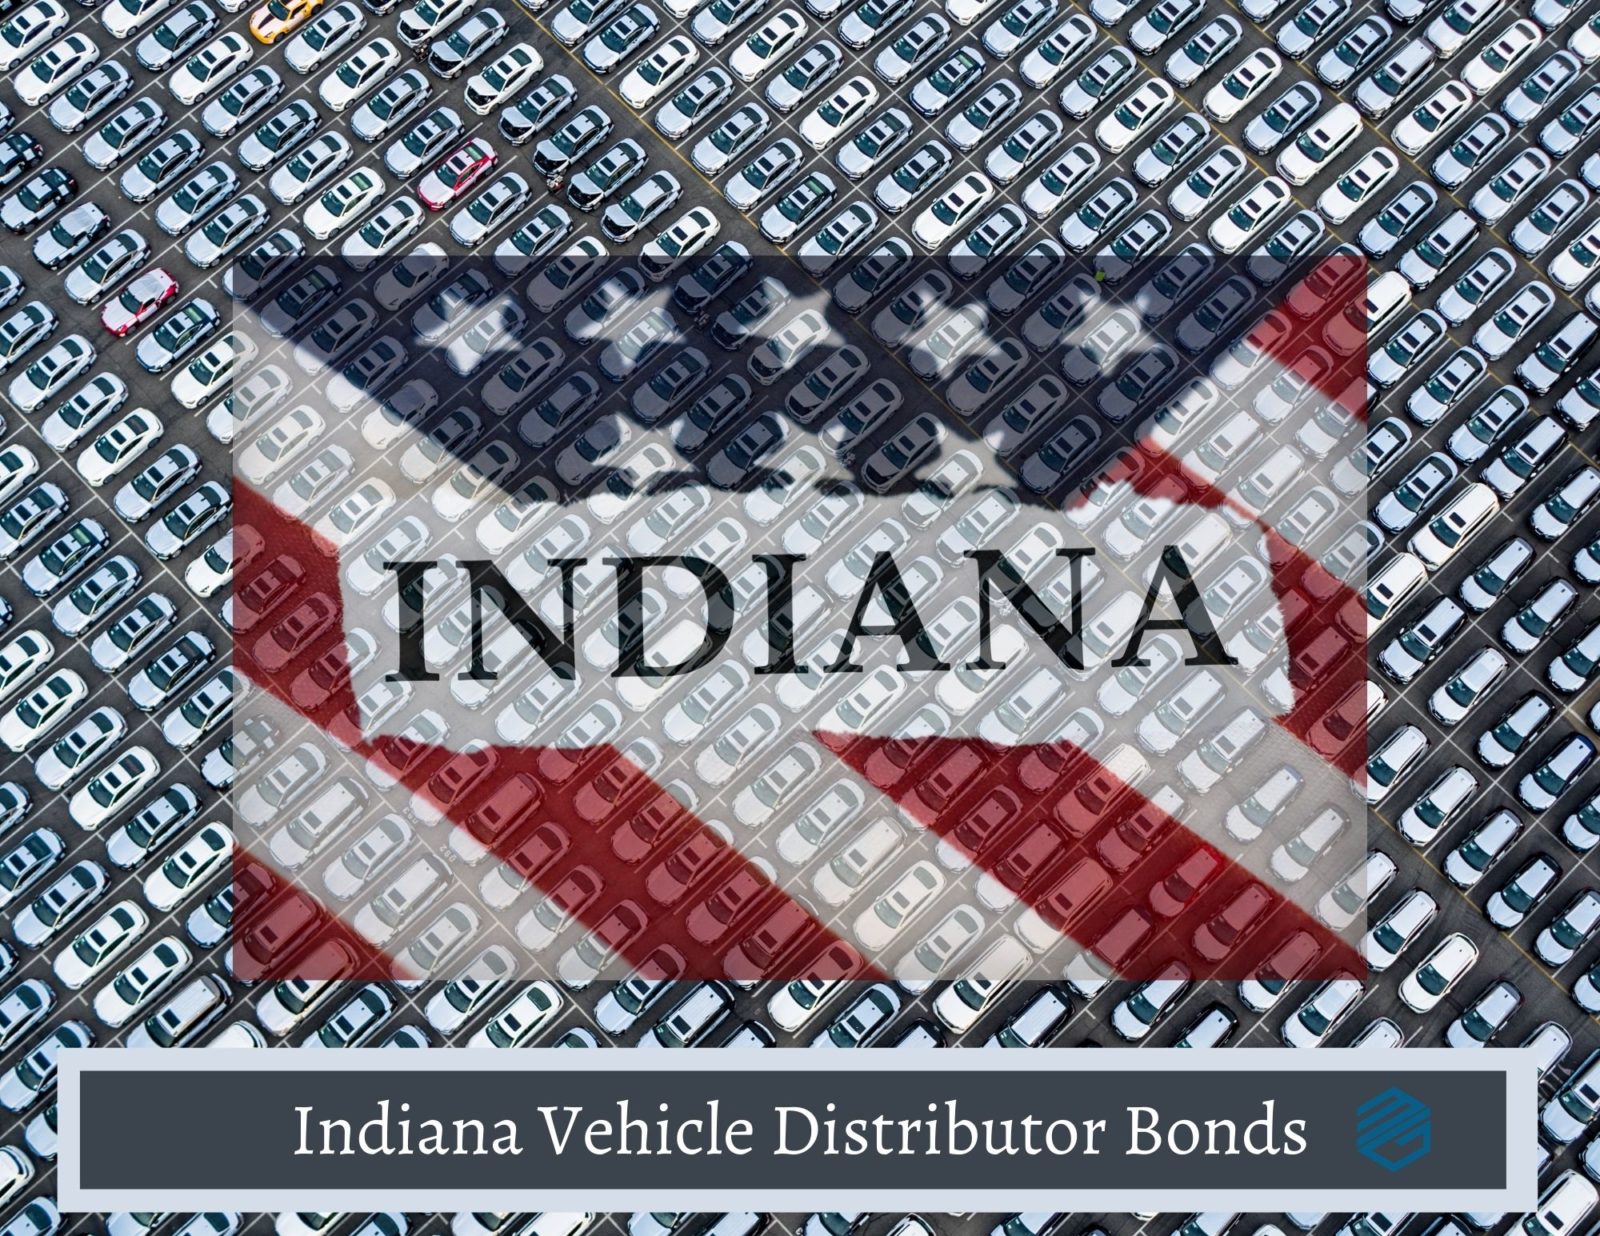 Indiana Vehicle Distributor Bonds - A big car lot in the background. A see through overlay of an Indiana American Flag over the cars. A text box that reads, "Indiana Vehicle Distributor Bonds".